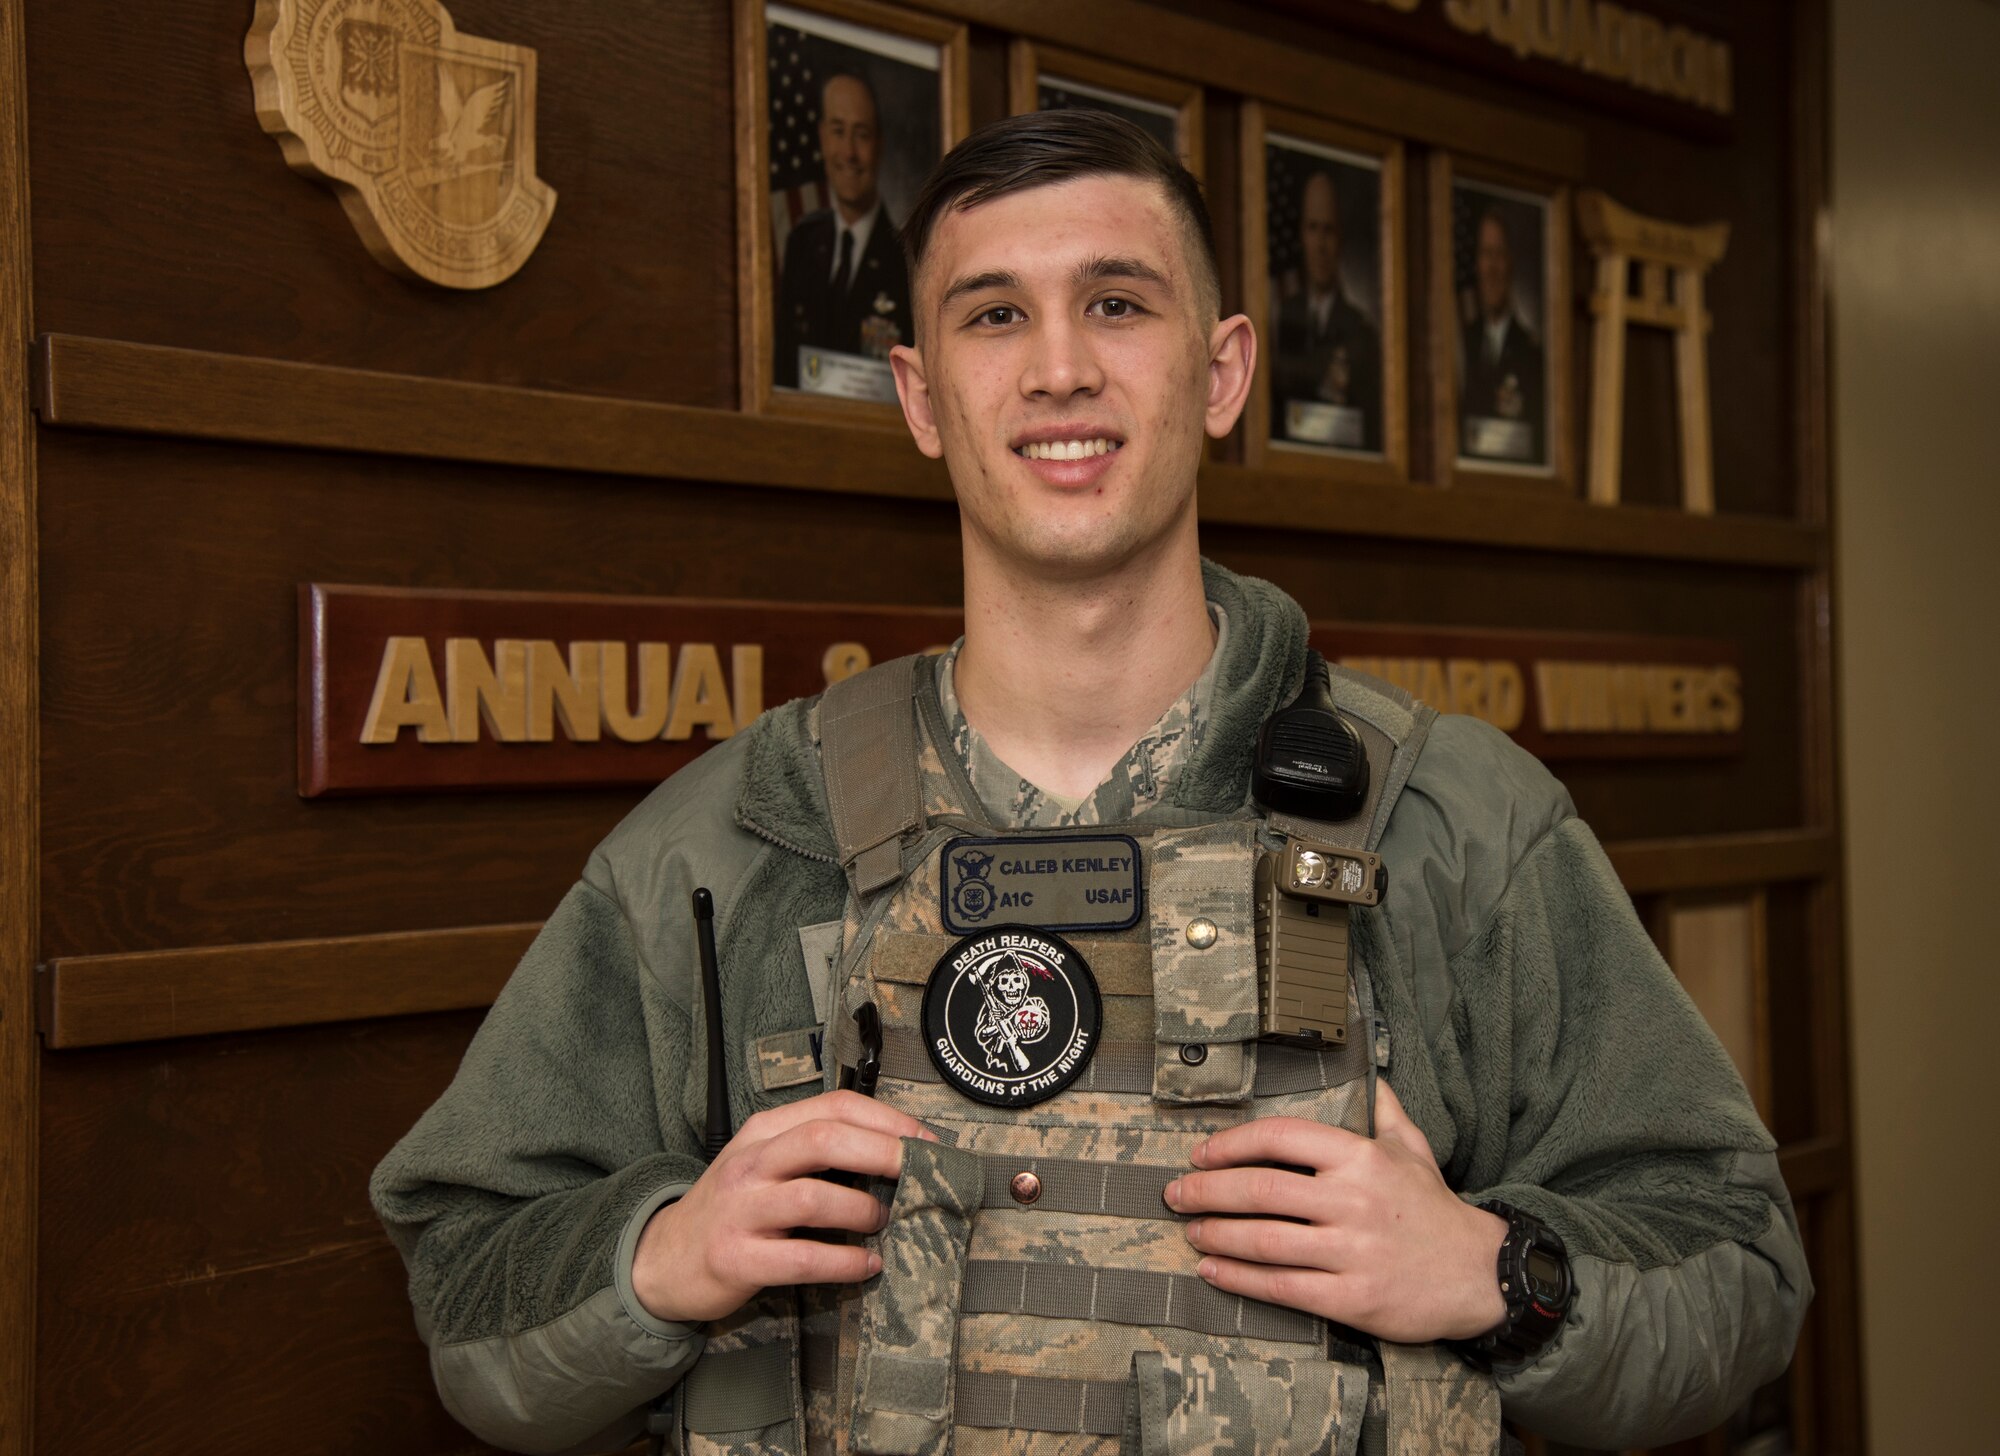 U.S. Air Force Airman 1st Class Caleb Kenley, a security response team member and installation entry controller with the 35th Security Forces Squadron, poses for a Wild Weasel of the Week portrait at Misawa Air Base, Japan, March 1, 2016. Kenley was recognized as the Wild Weasel of the Week by the 35th SFS for his superior performance, outstanding work ethic and overall good conduct and discipline. (U.S. Air Force photo by Senior Airman Brittany A. Chase)